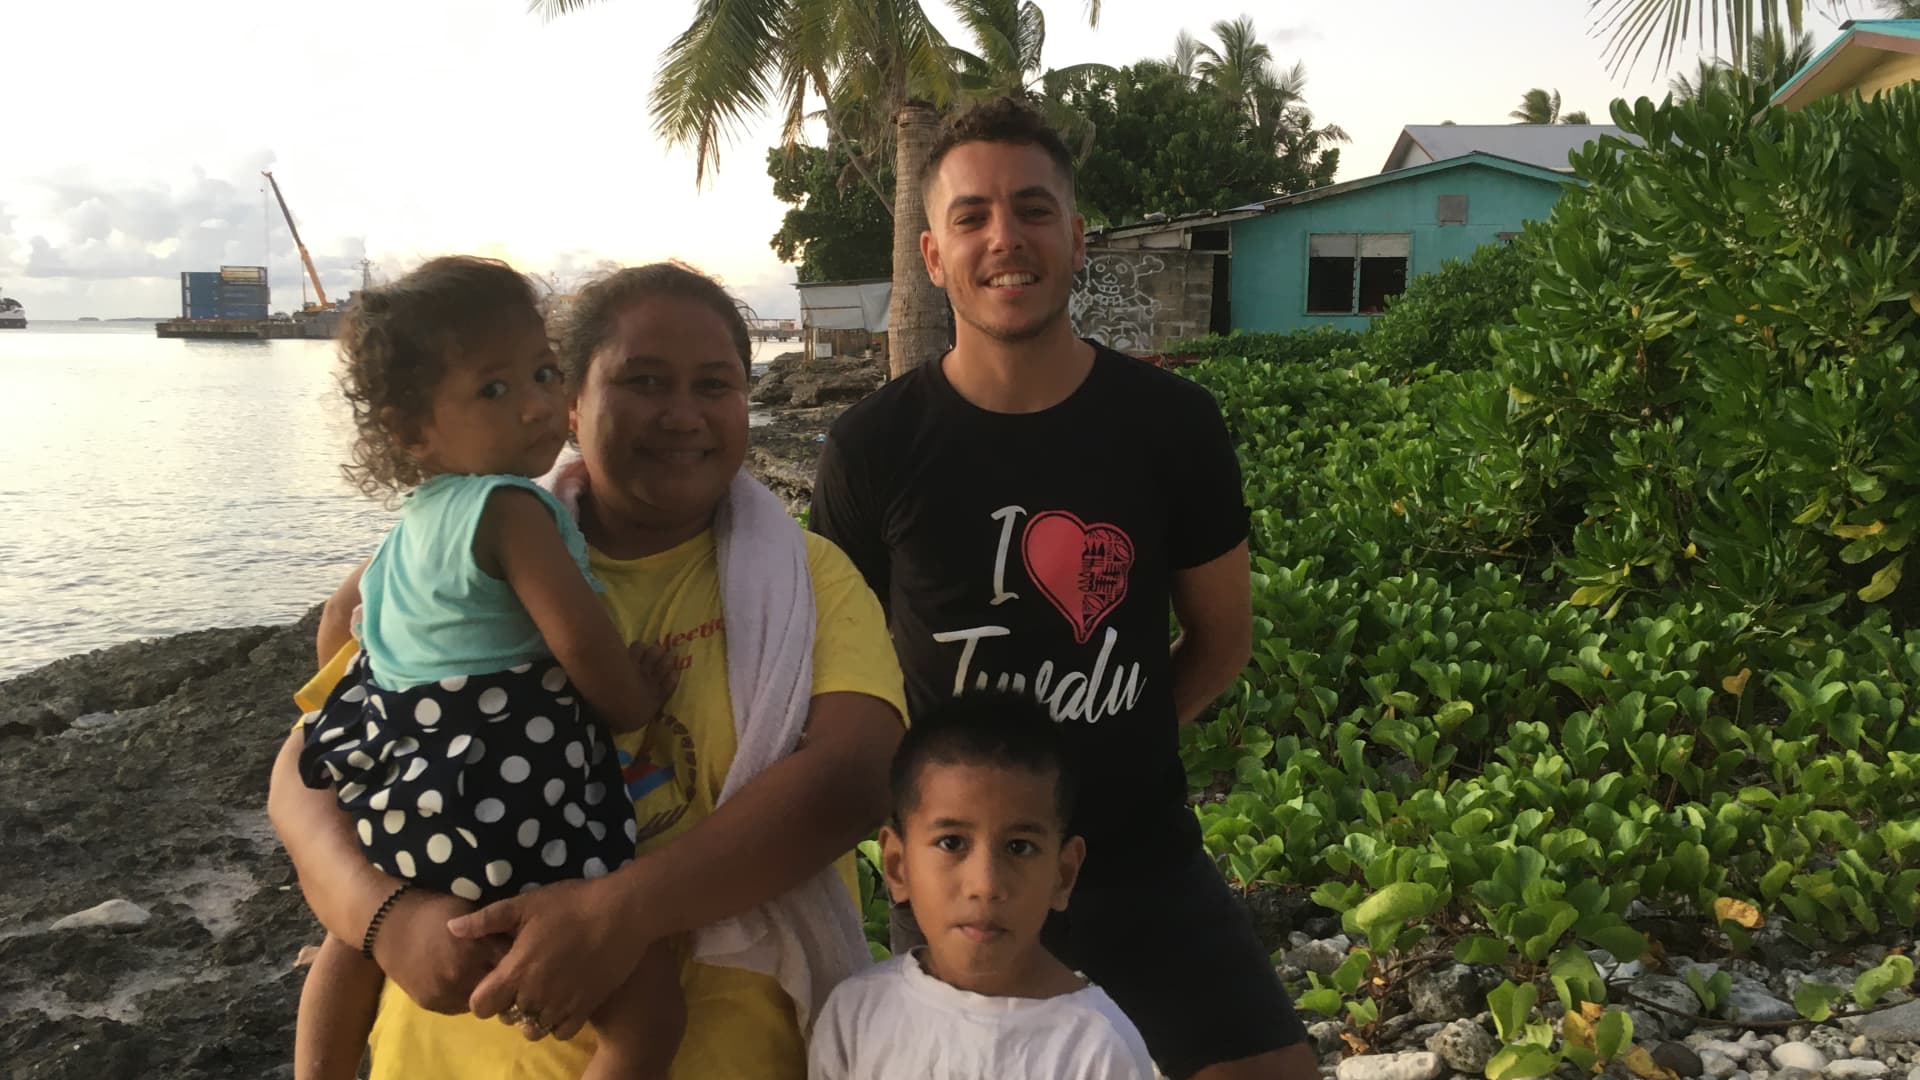 Daniel Sherrell in the low-lying island nation of Tuvalu, where he facilitated a two week climate-writing workshop with university students from the University of South Pacific Funafuti campus.